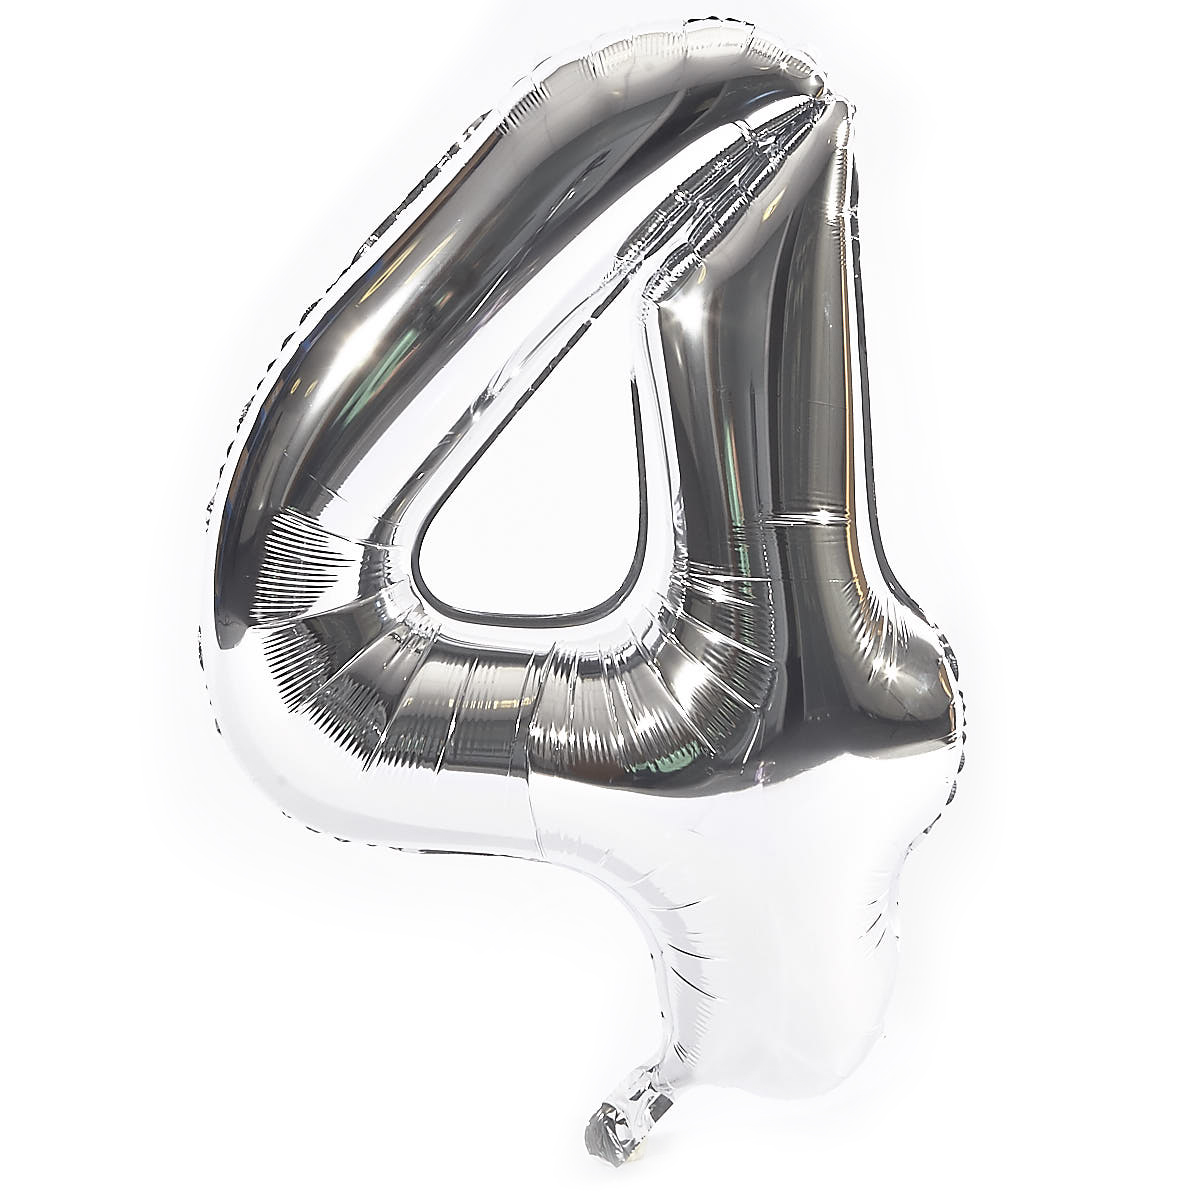 Age 40 Giant Foil Helium Numeral Balloons - Silver (deflated)